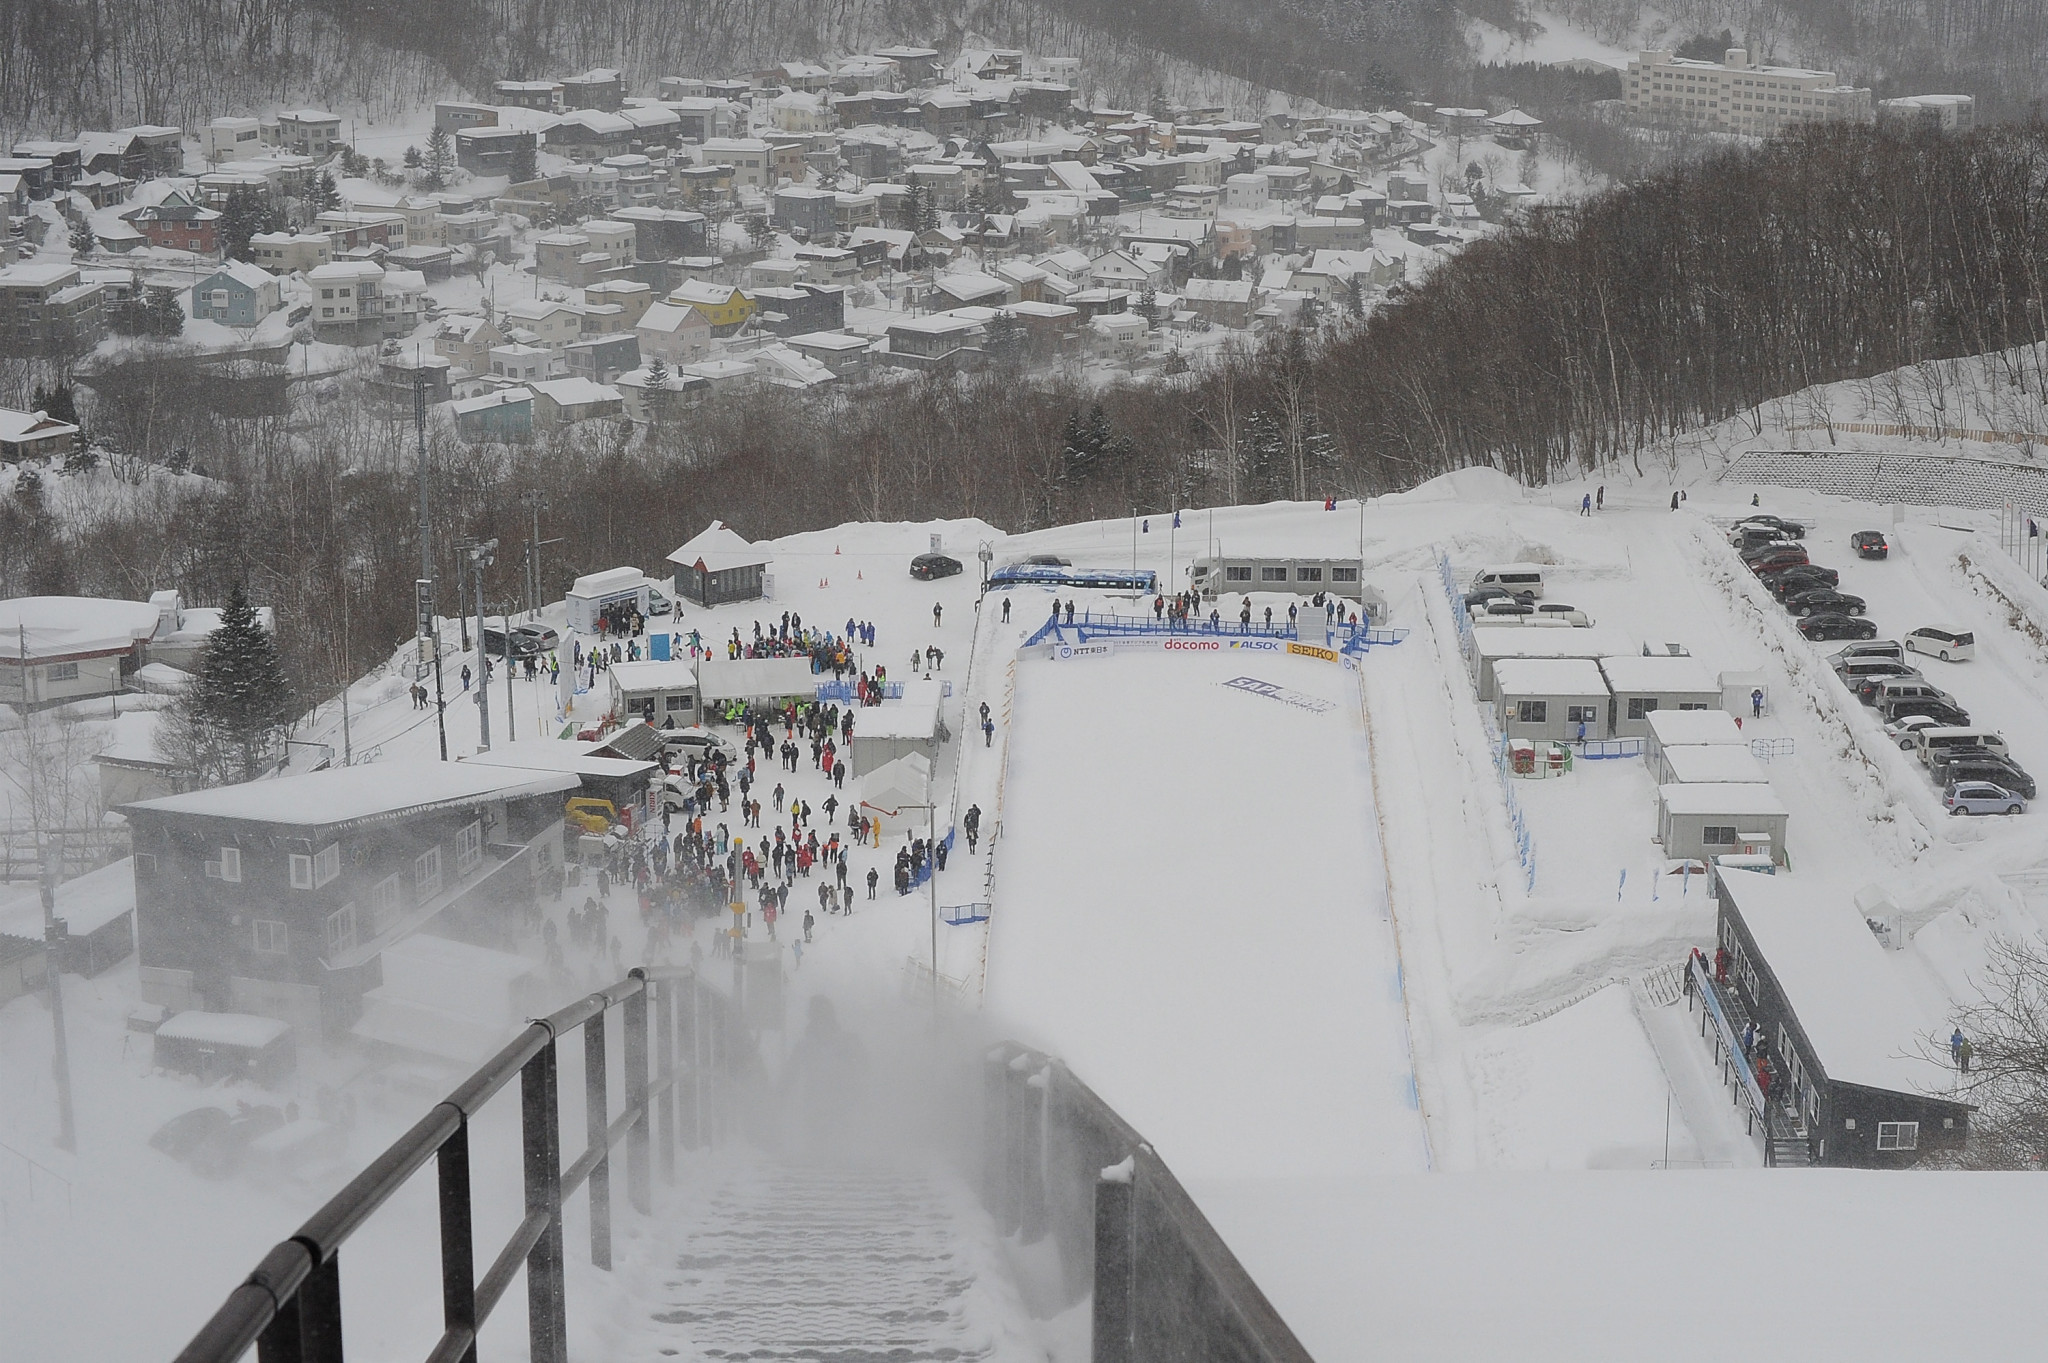 Sapporo expected to revise planned 2030 Winter Olympic bid